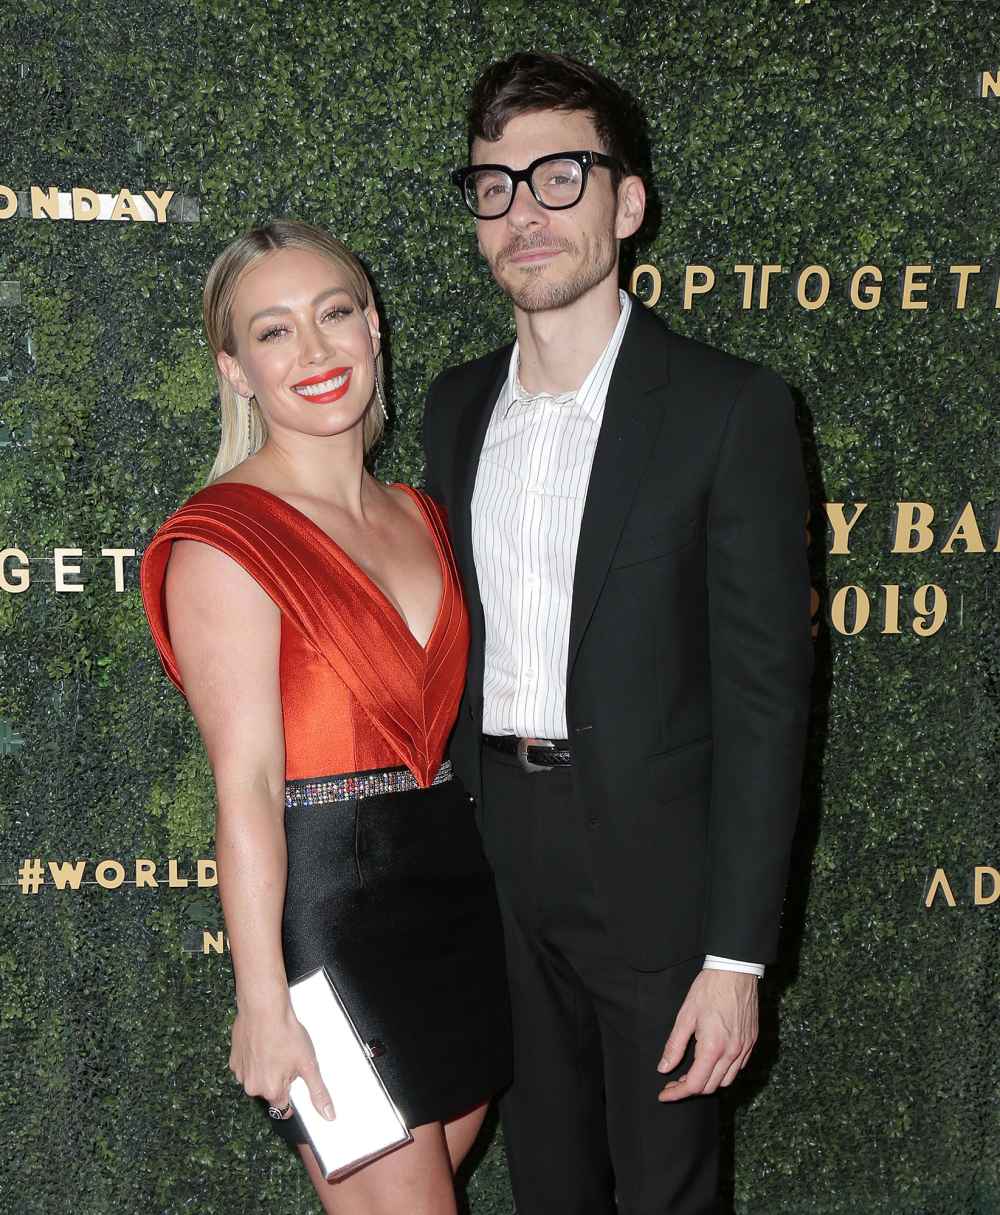 Hilary Duff Jokes Her and Fiance Matthew Koma’s Parents Would ‘Kill’ Them If They Eloped